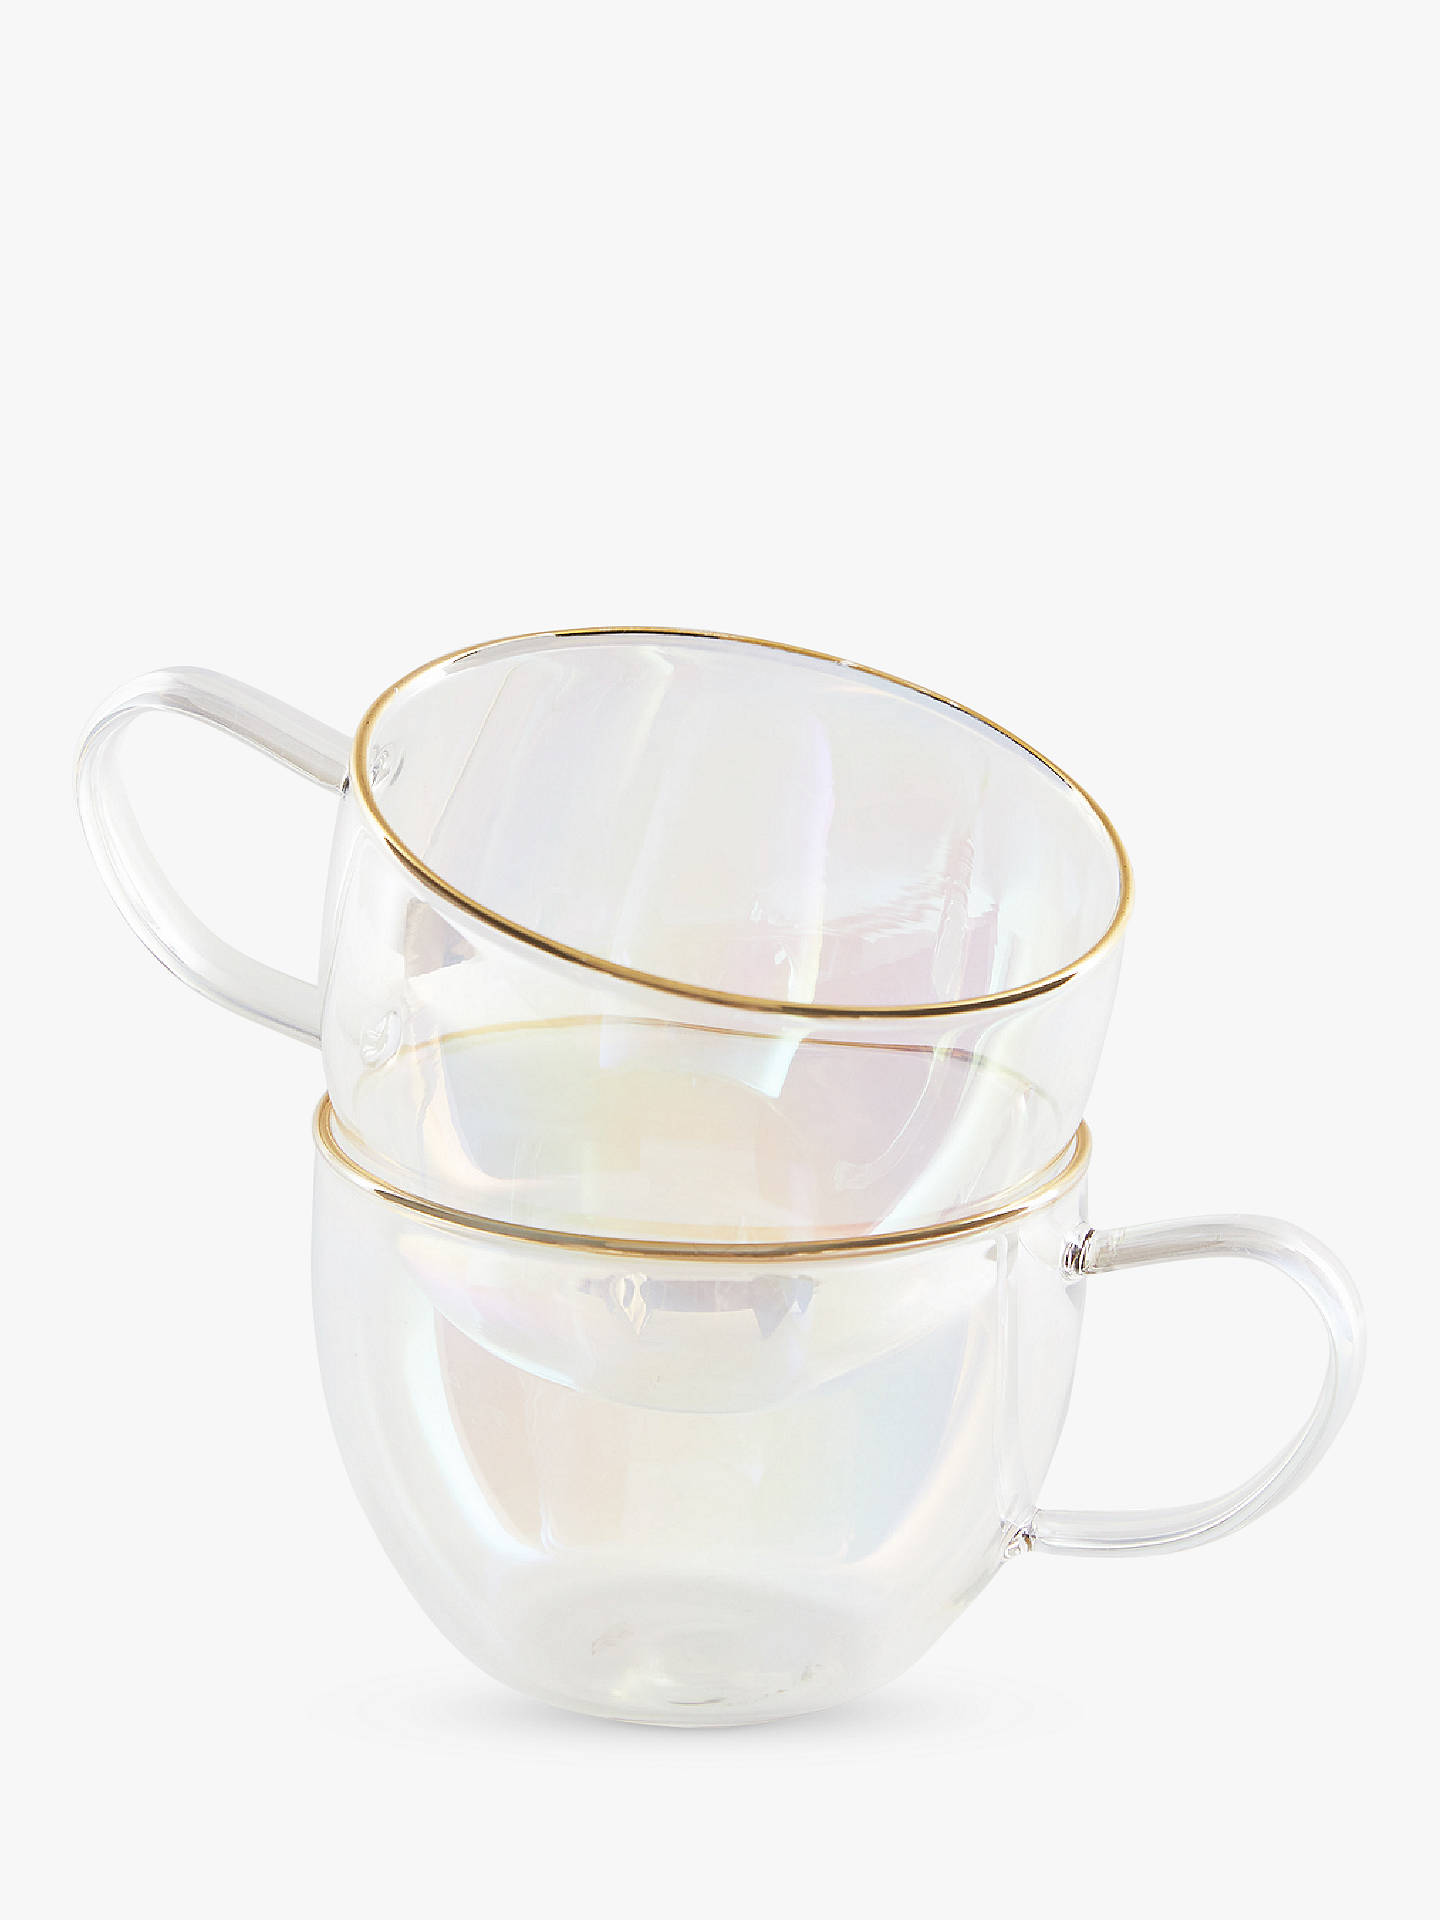 Root7 G Tea Glass Tea Cups Set Of 2 250ml Clear At John Lewis Partners